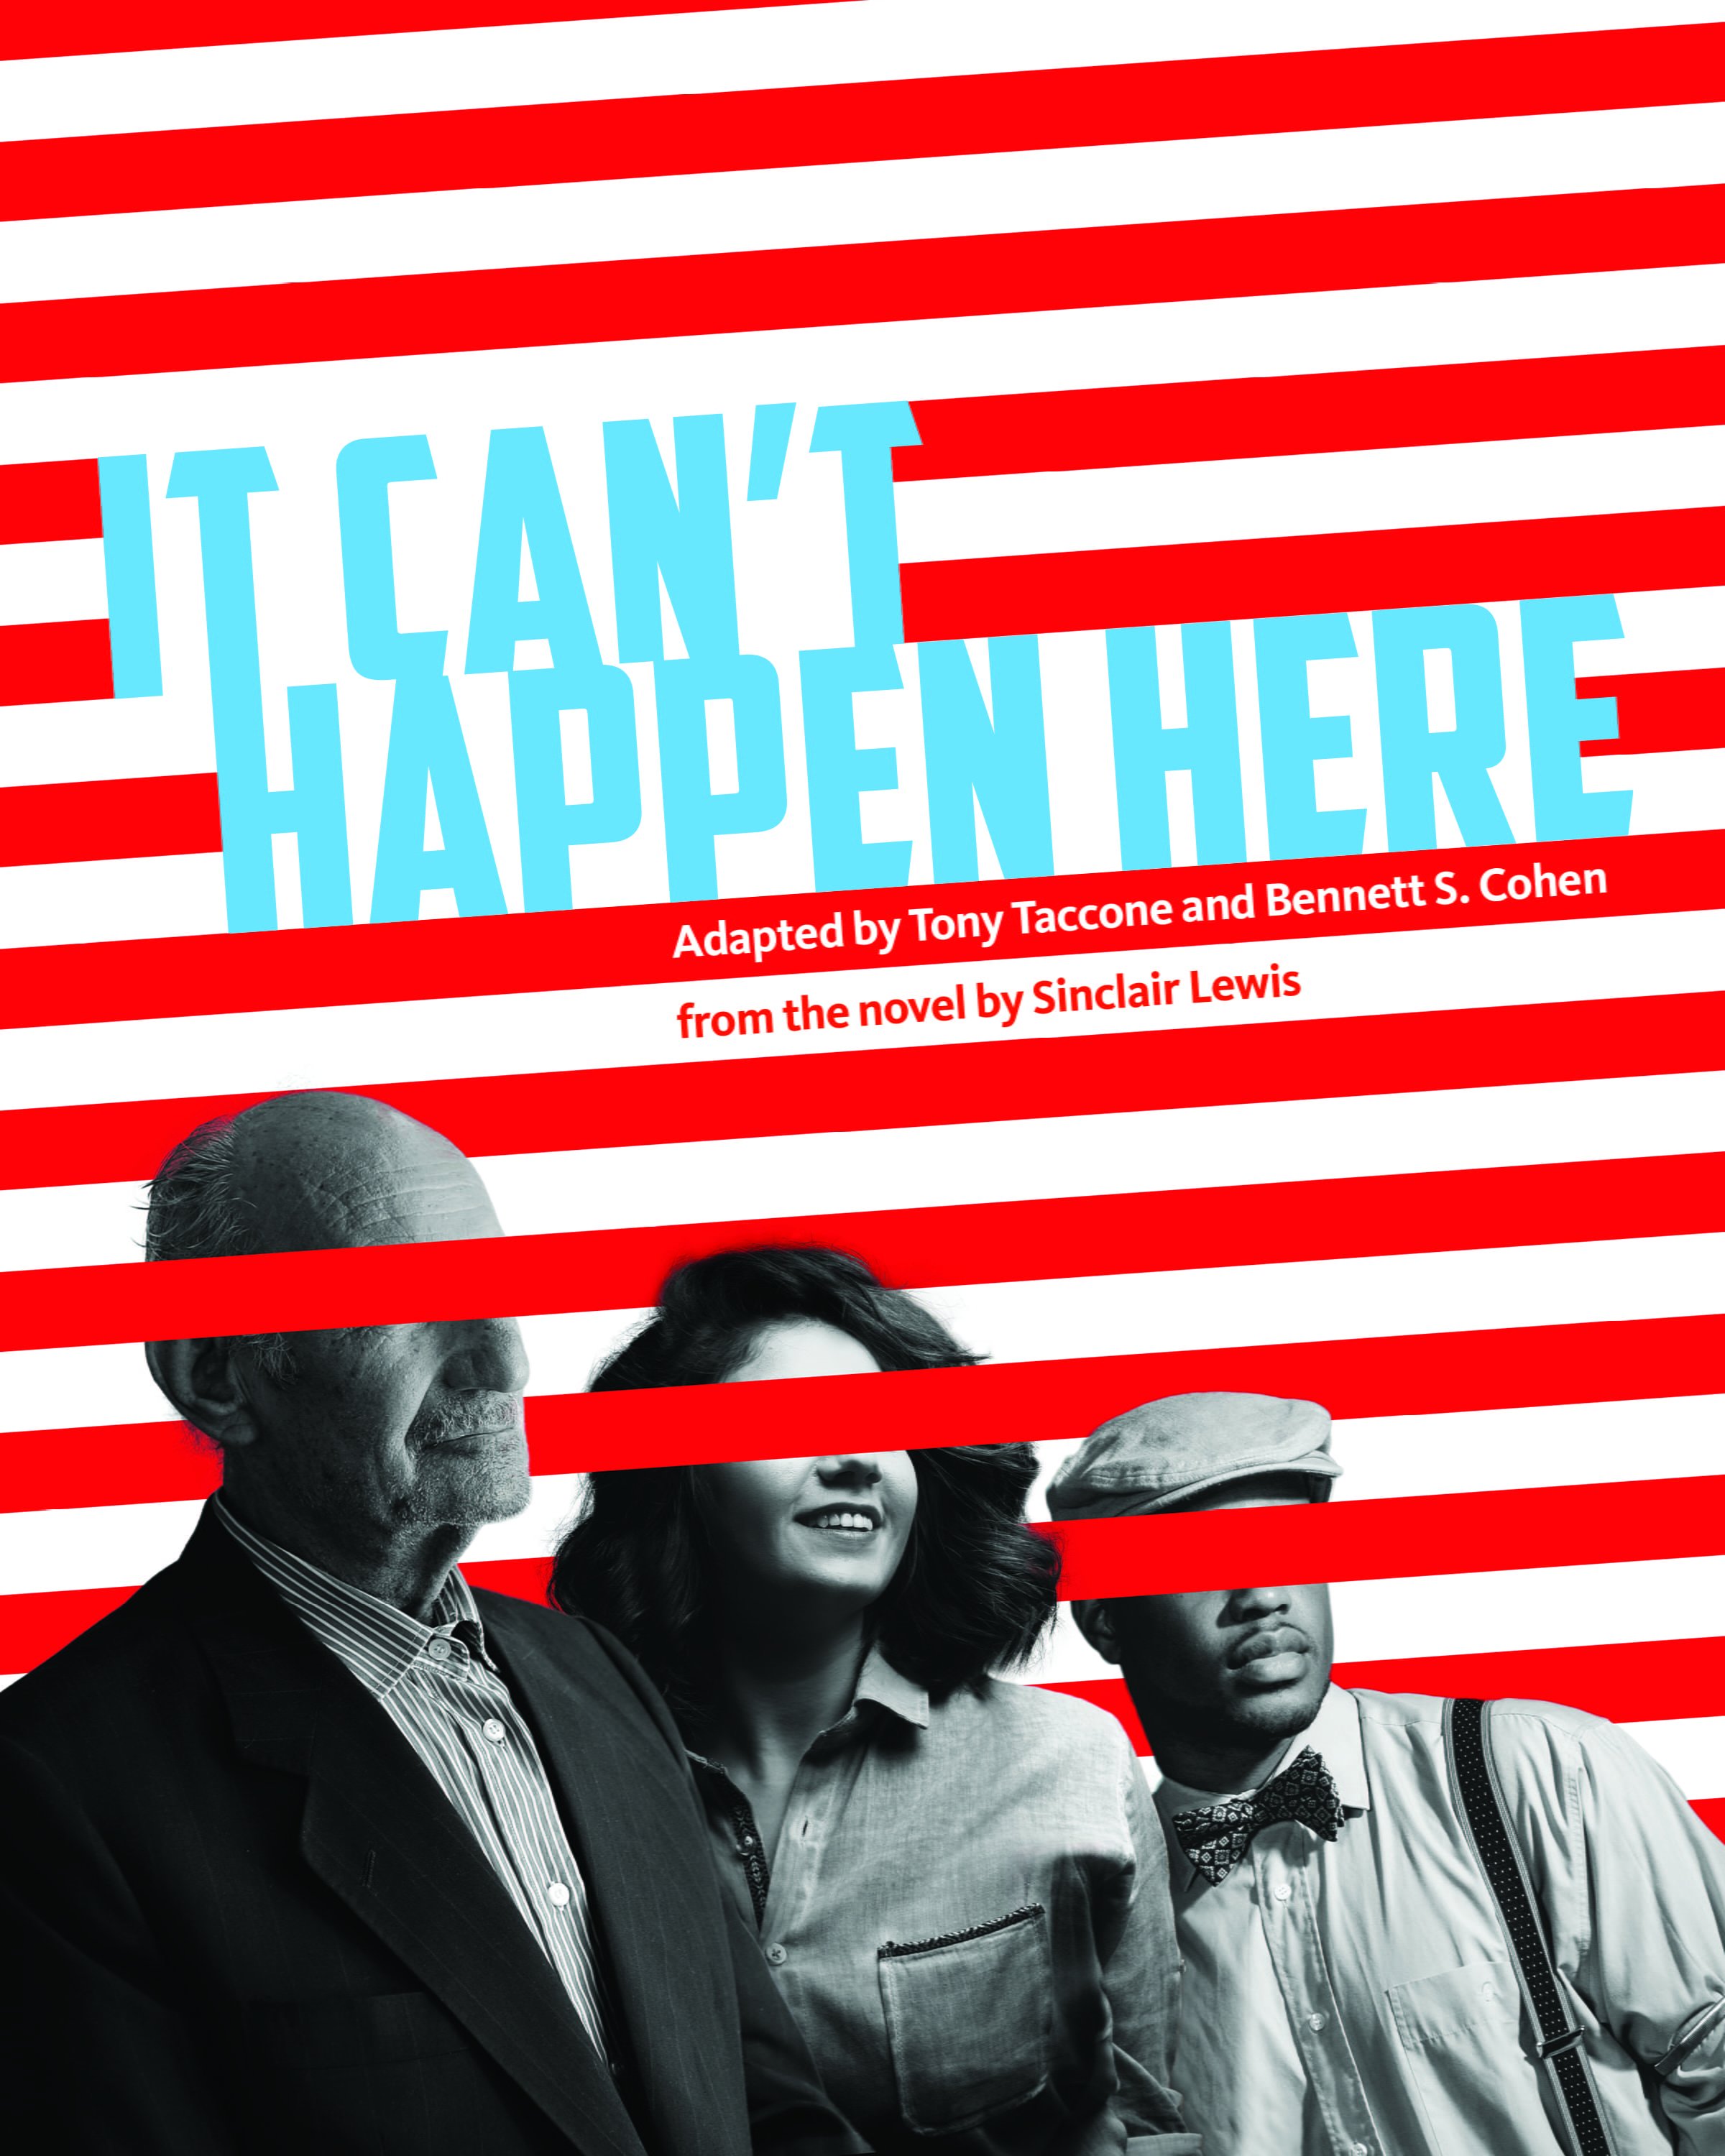 It Can't Happen Here: Adapted by Tony Taccone and Bennett S. Cohen from the novel by Sinclair Lewis.